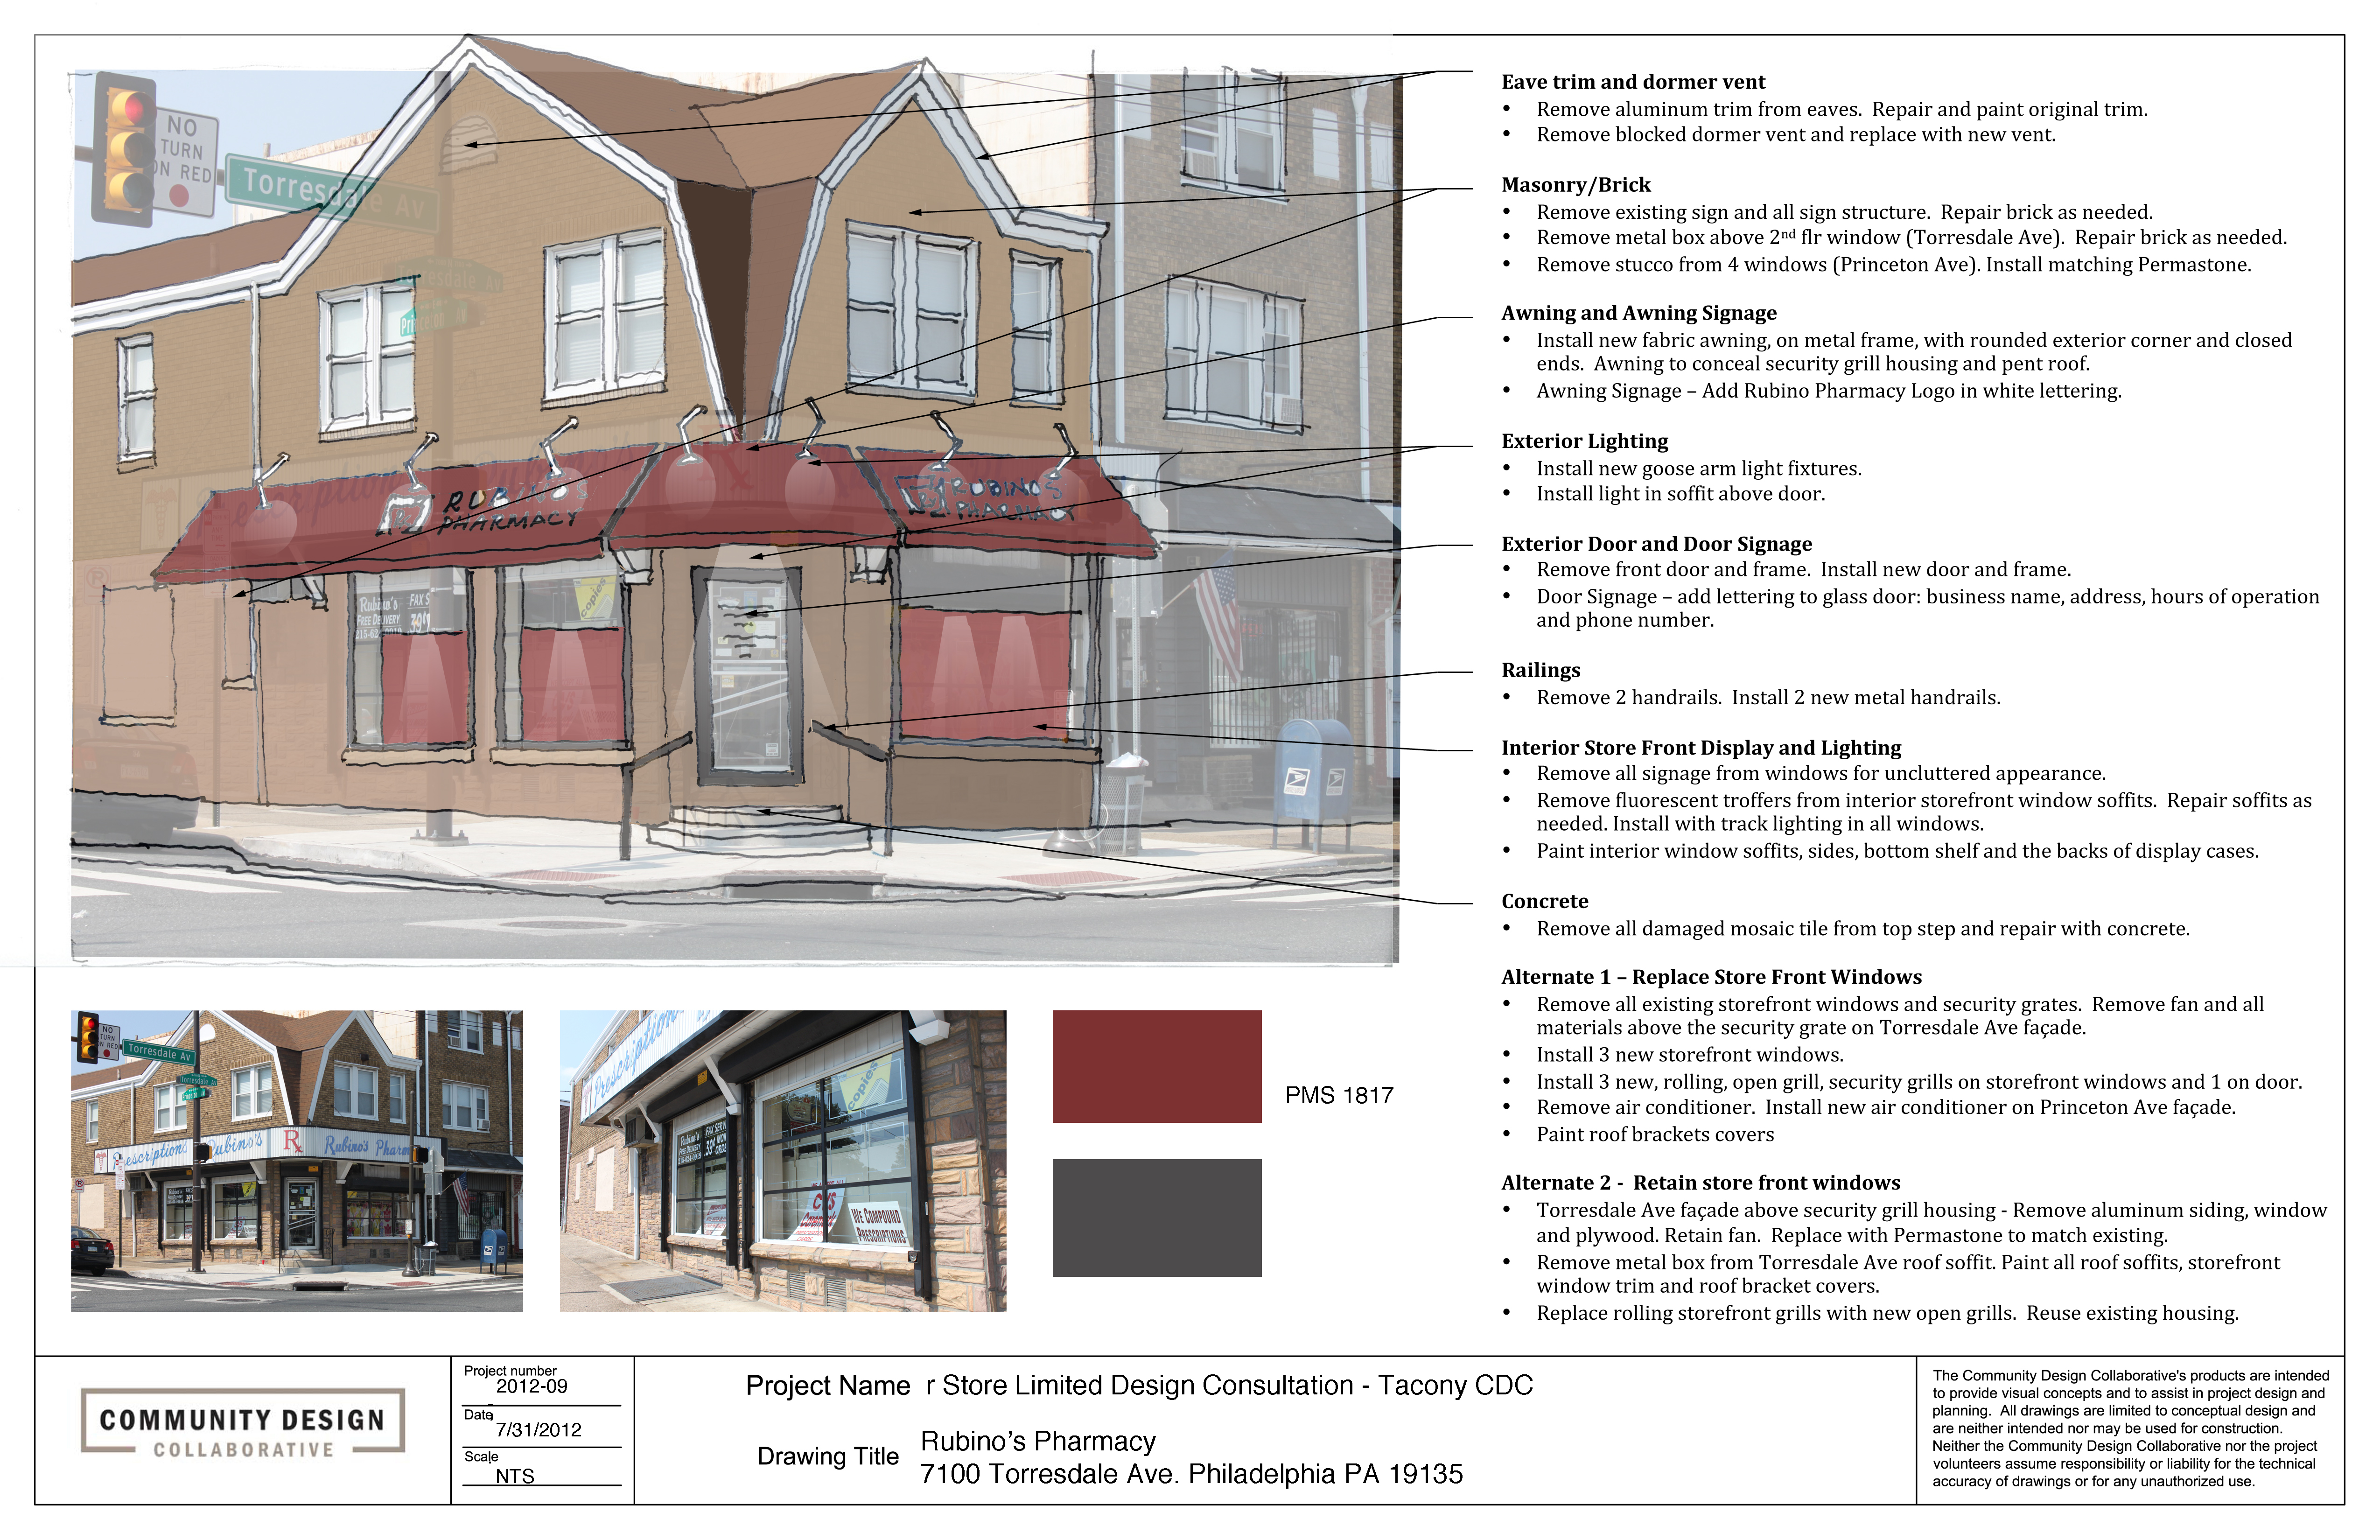 Rubino's Pharmacy redesign possibilities. (7100 Torresdale Ave.) | Community Design Collaborative